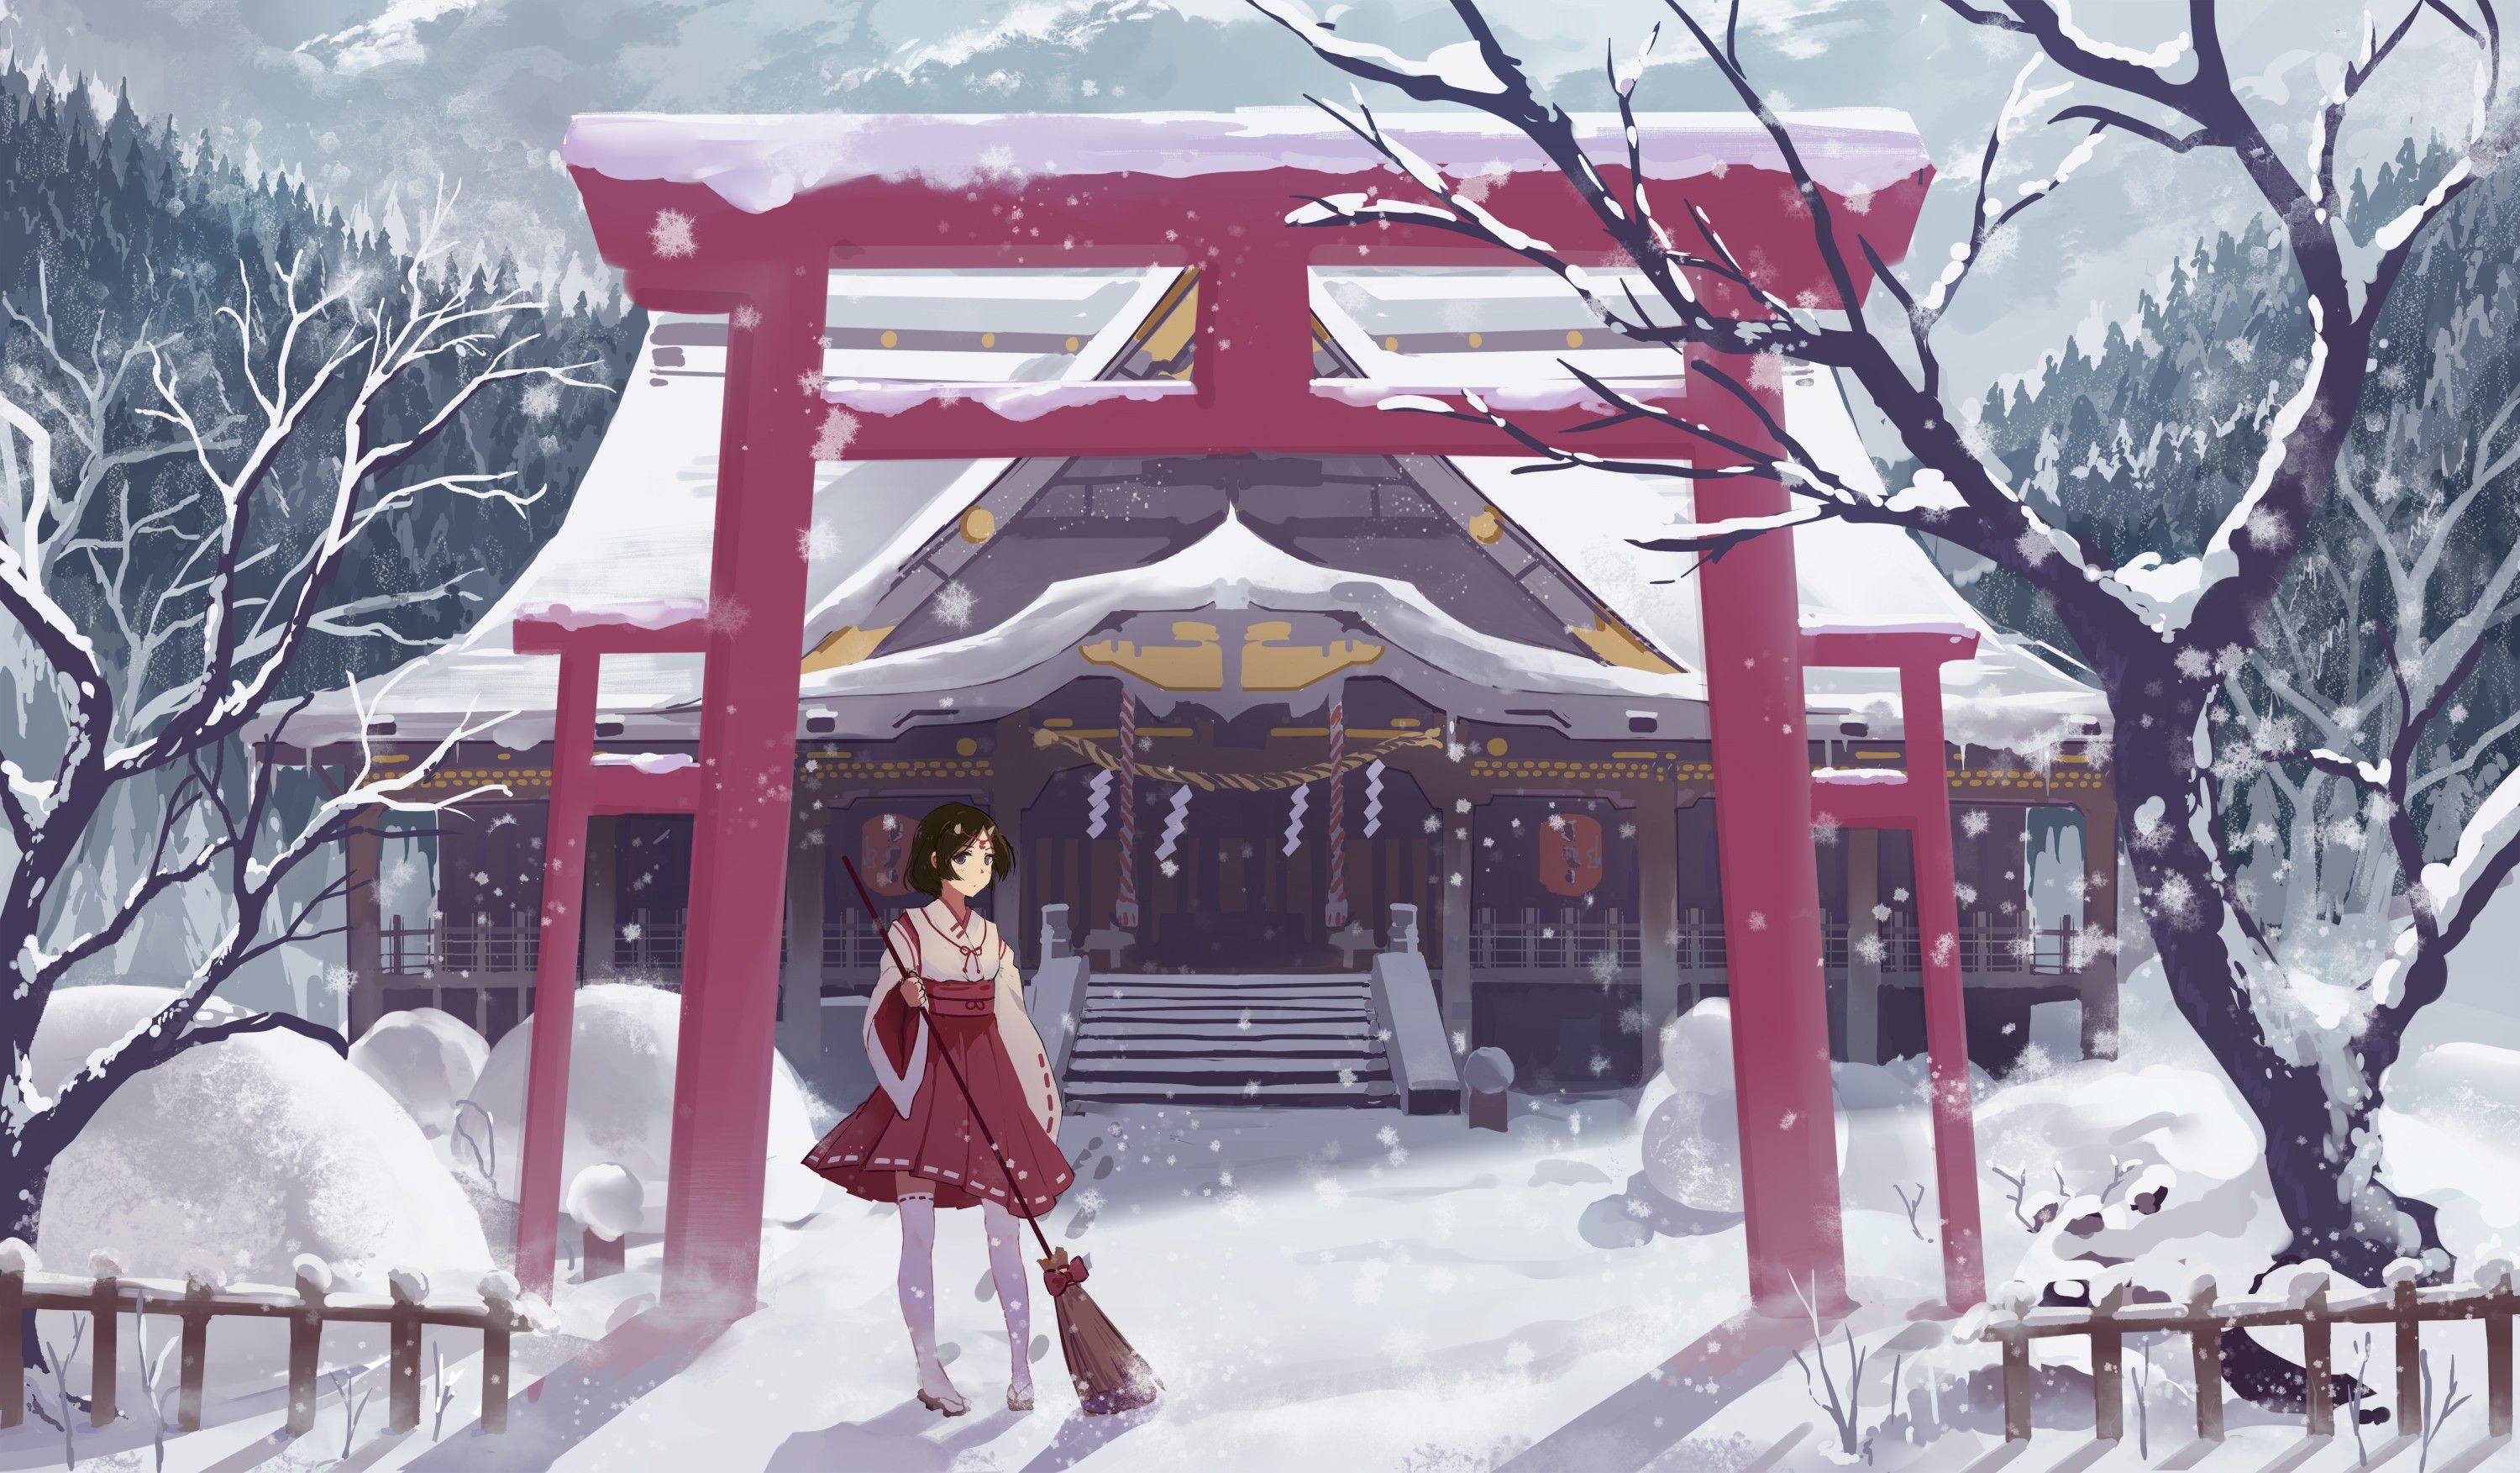 #arch, #building, #dress, #anime girls, #mountains, #house, #original characters, #forest, #snow, #miko, #trees, #winter, #Asian architecture, #shrine, wallpaper